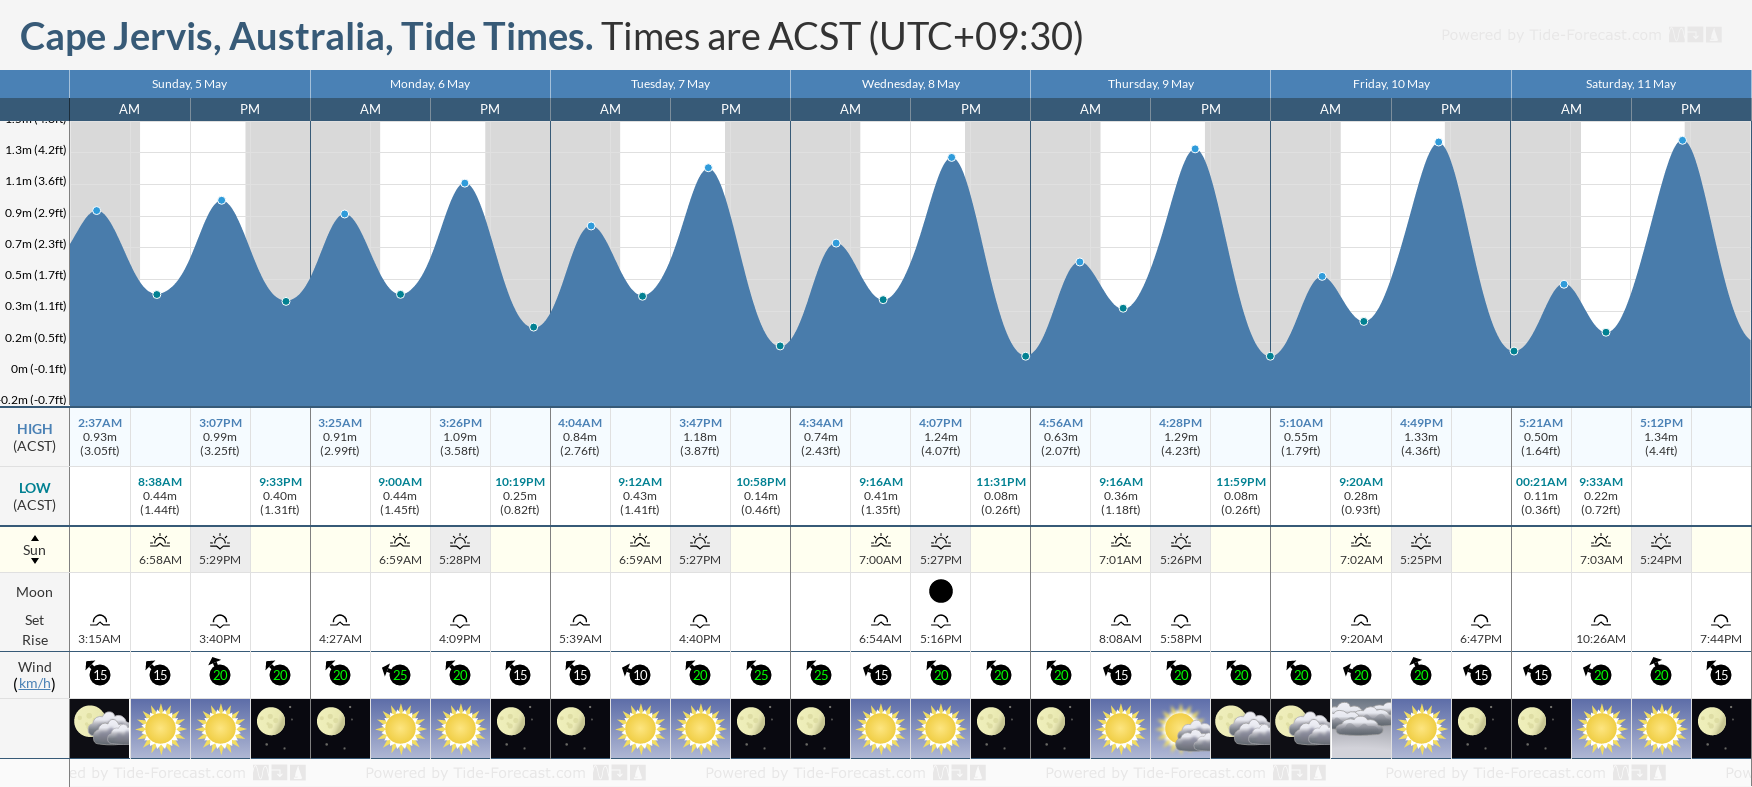 Cape Jervis, Australia Tide Chart including high and low tide tide times for the next 7 days